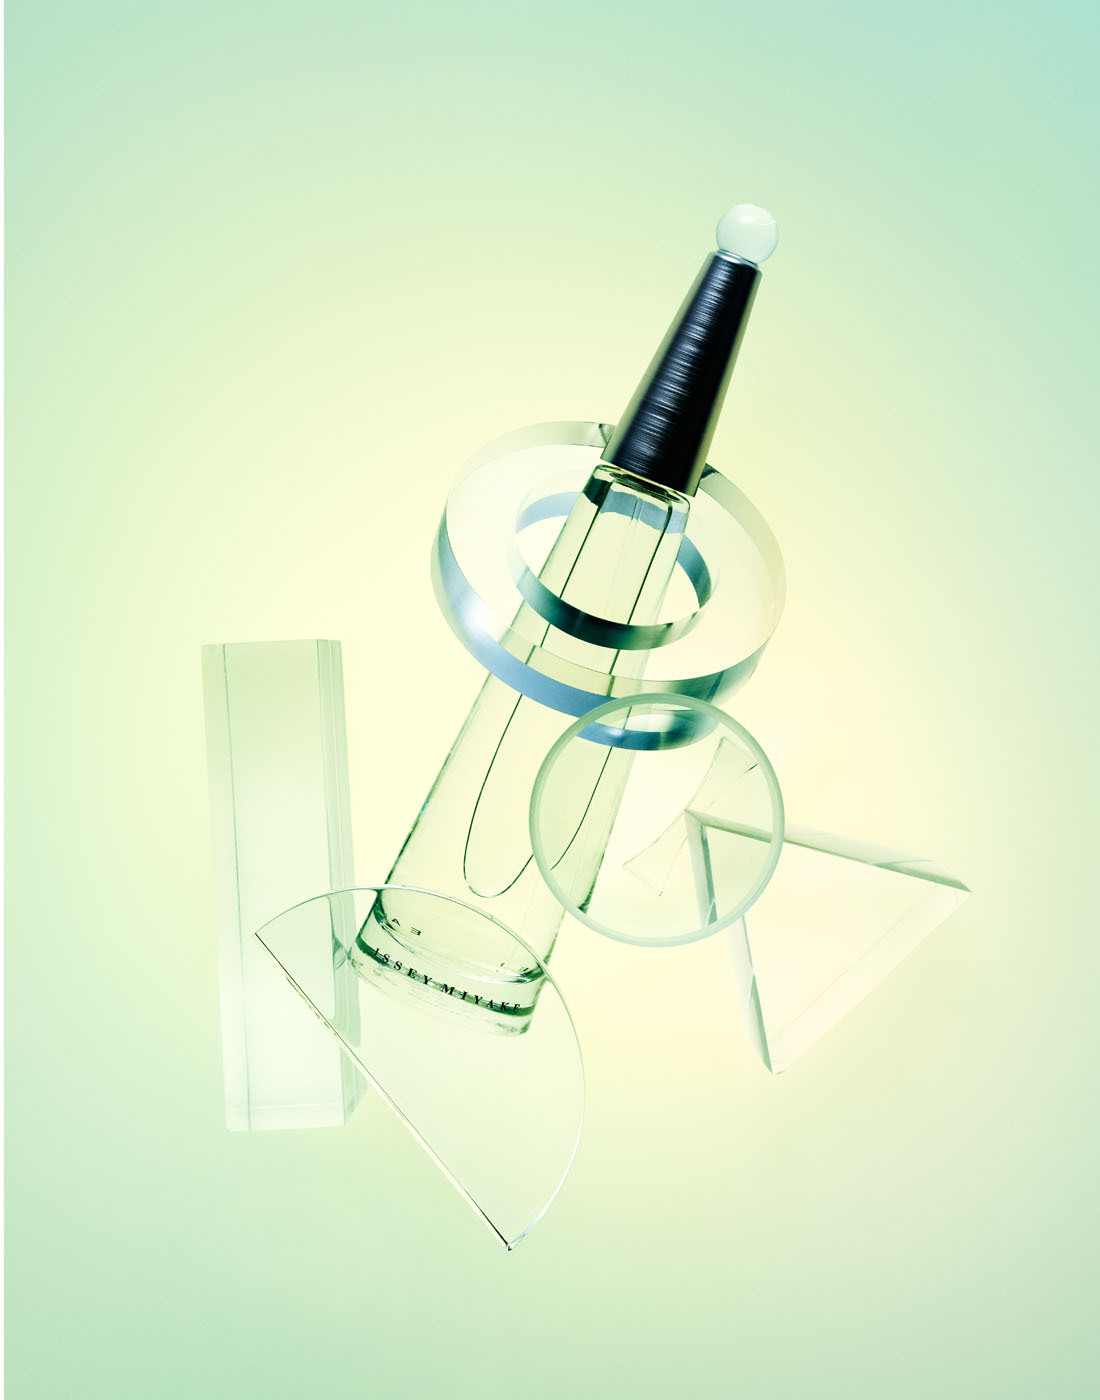 Miyake perfume with perspex blocks by Alexander Kent London based still life and product photographer.